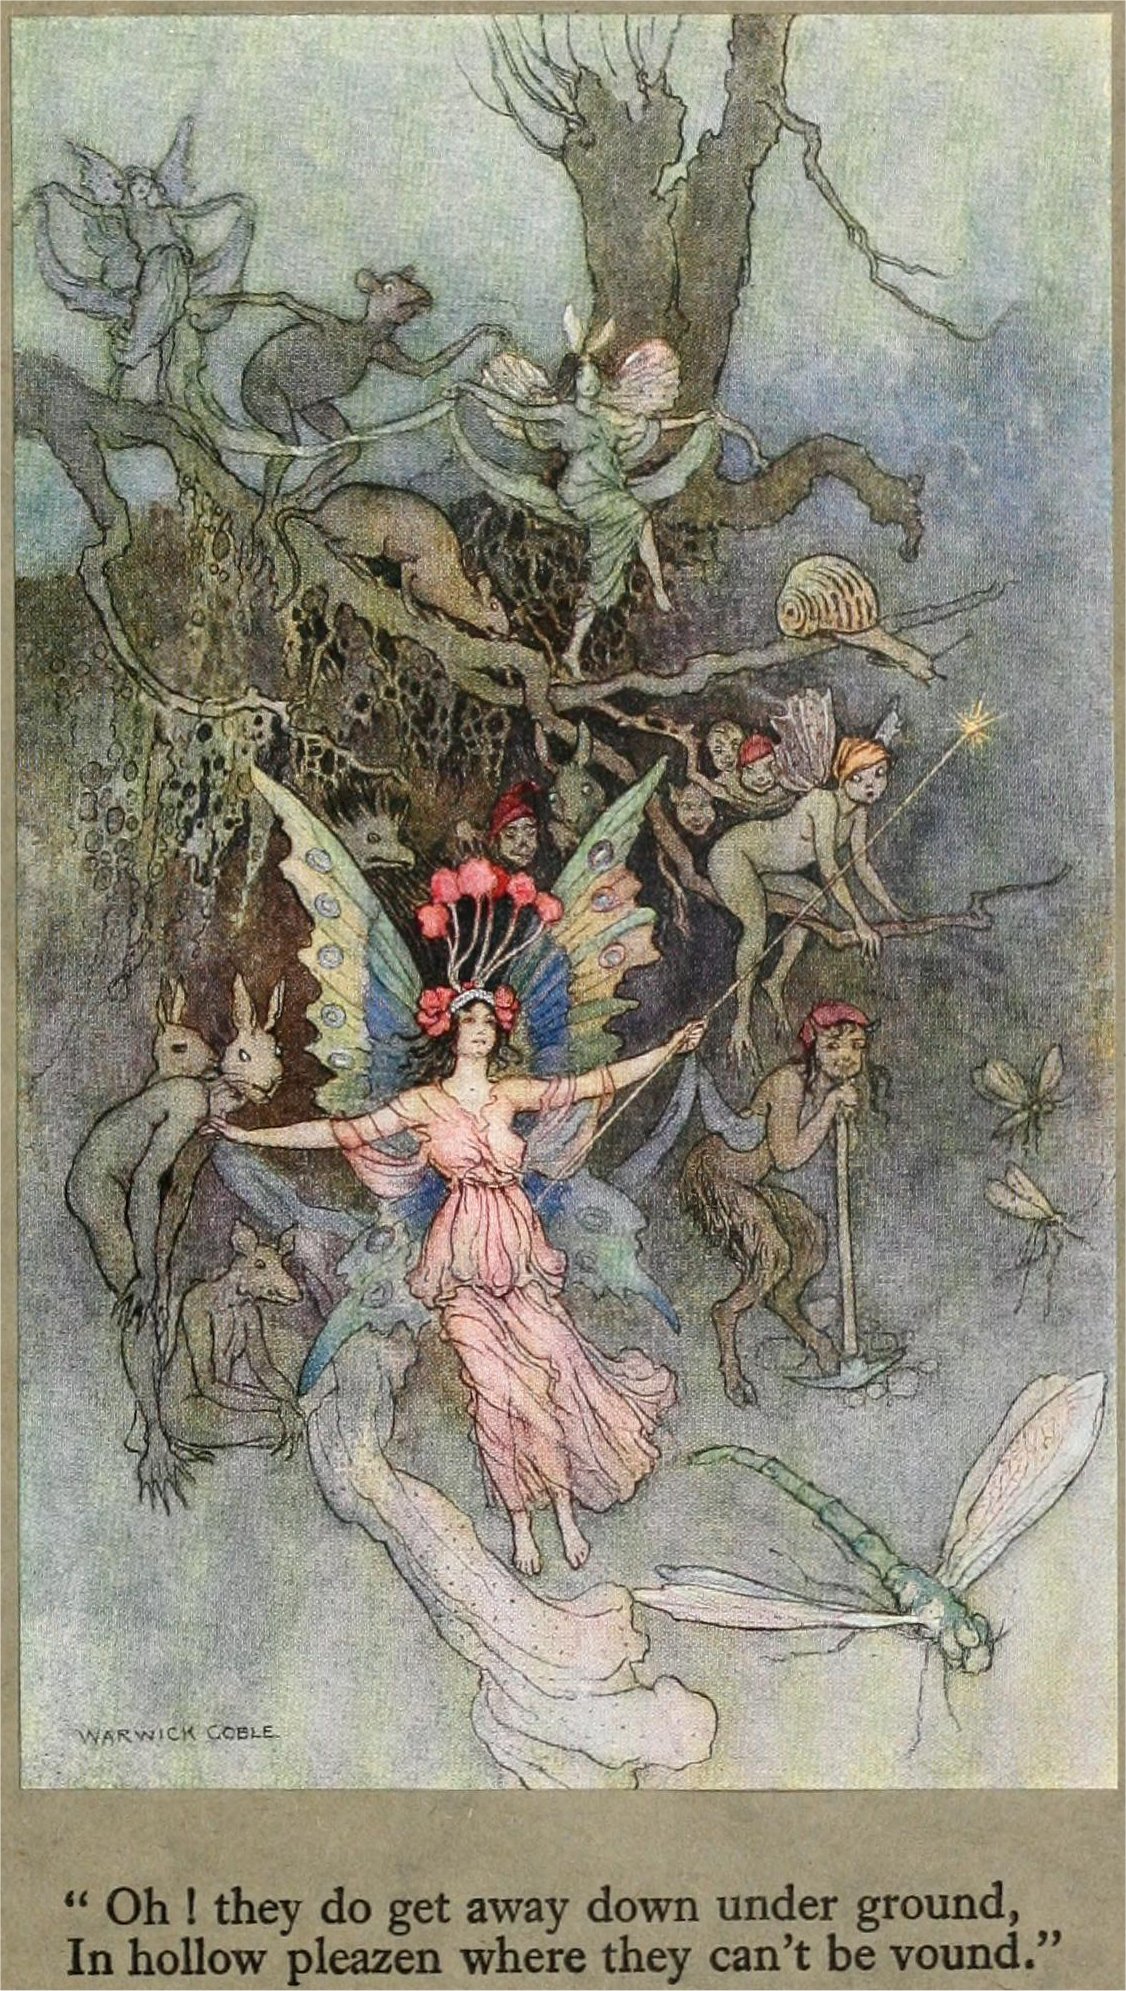 A fairy extends her arms and is surrounded by creatures next to a tree.